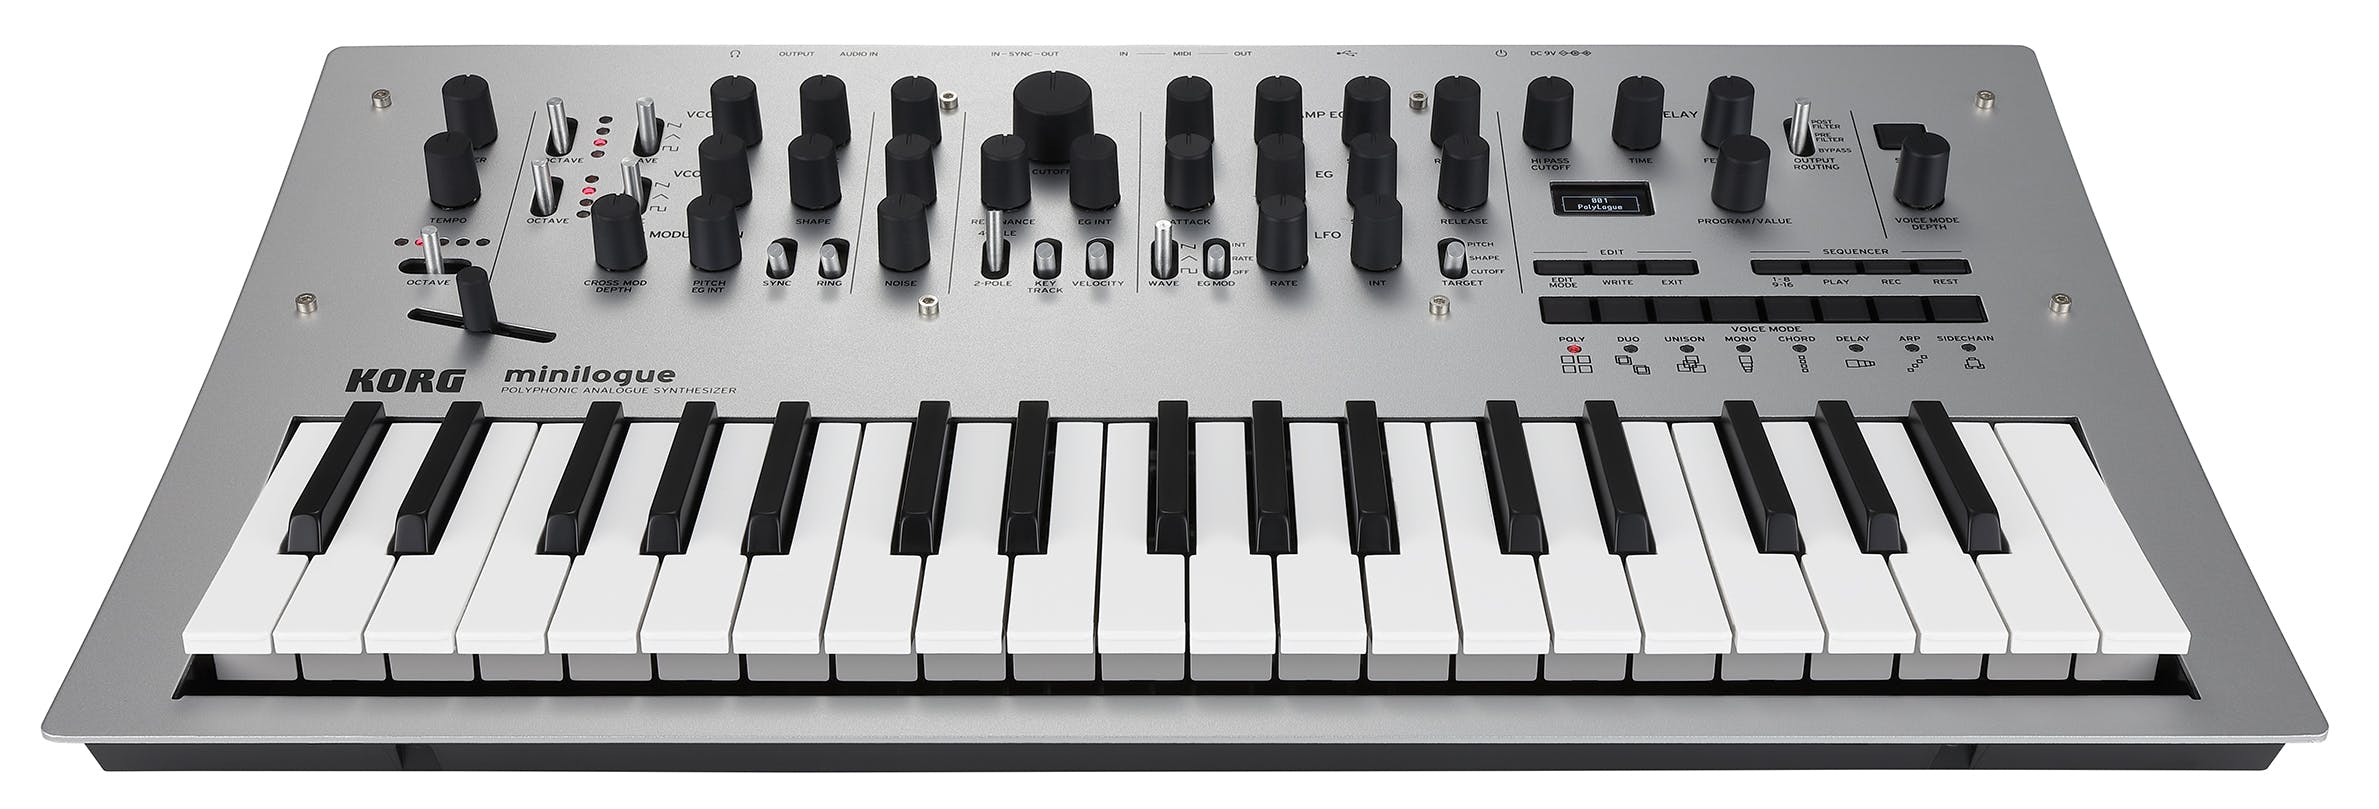 Korg Minilogue Polyphonic Analogue Synthesizer - Andertons Music Co.